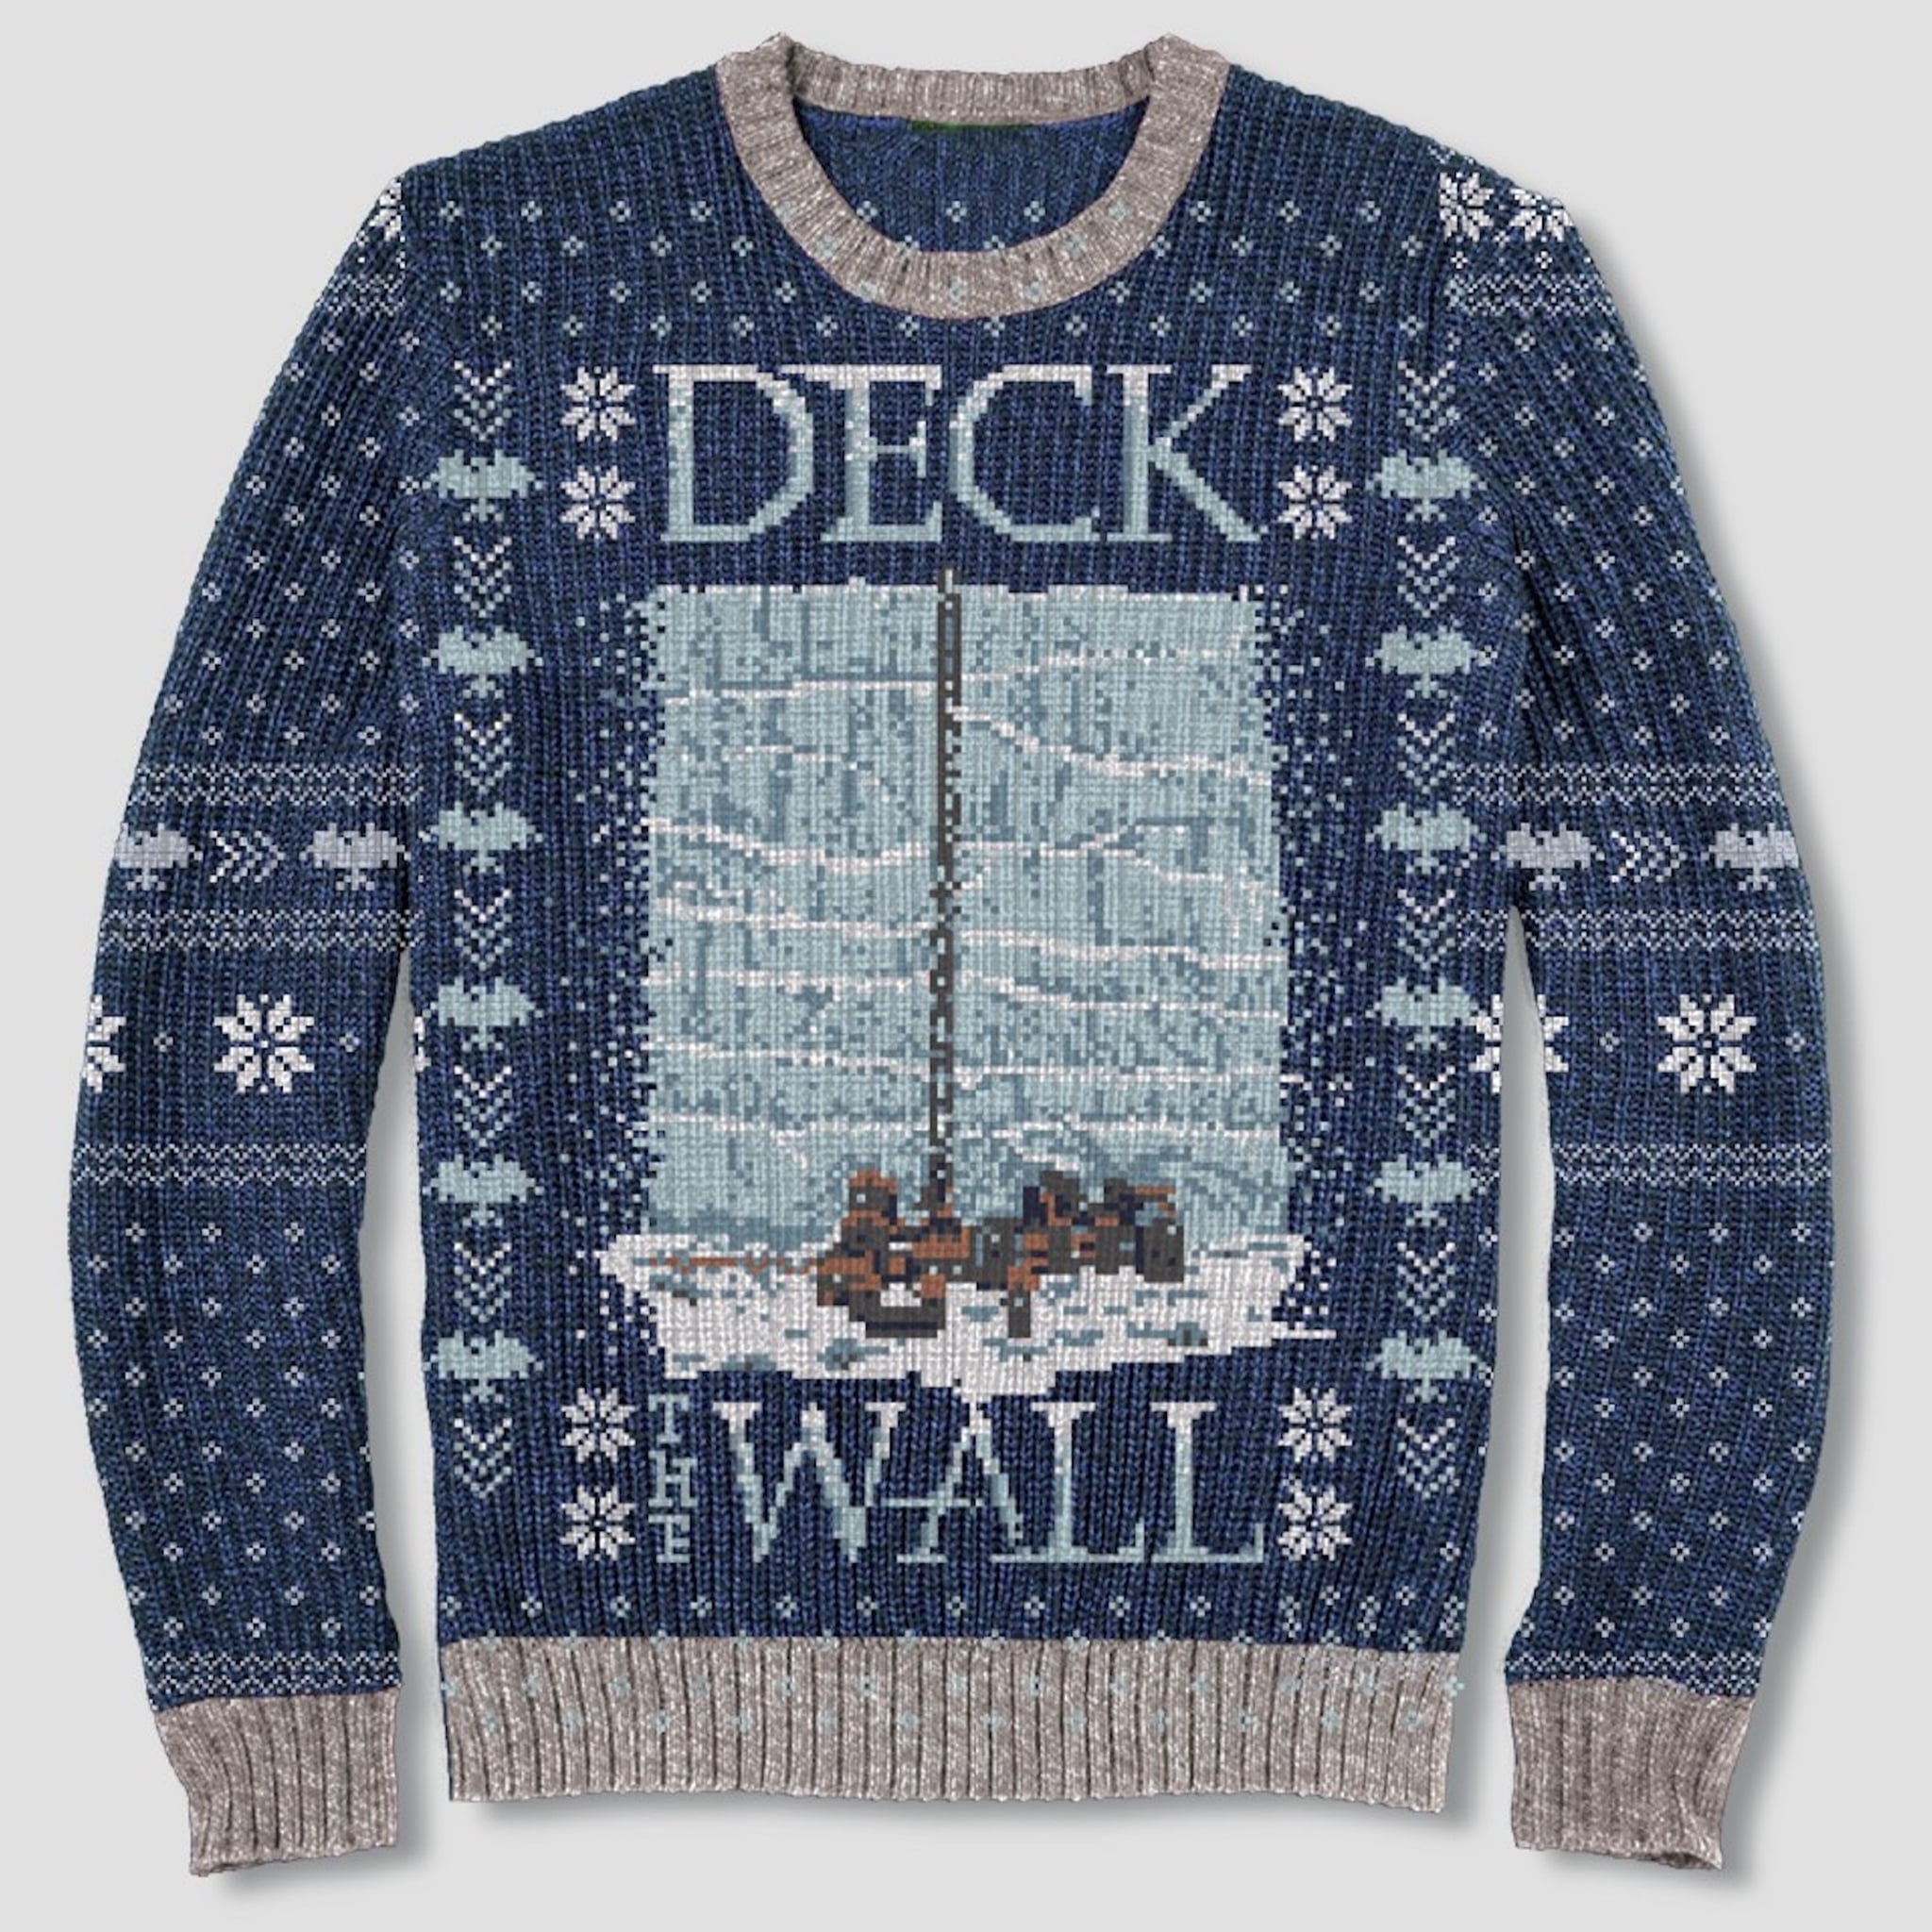 Game Of Thrones Ugly Christmas Sweaters At Target 2018 - Target Game Of Thrones Christmas Sweater , HD Wallpaper & Backgrounds